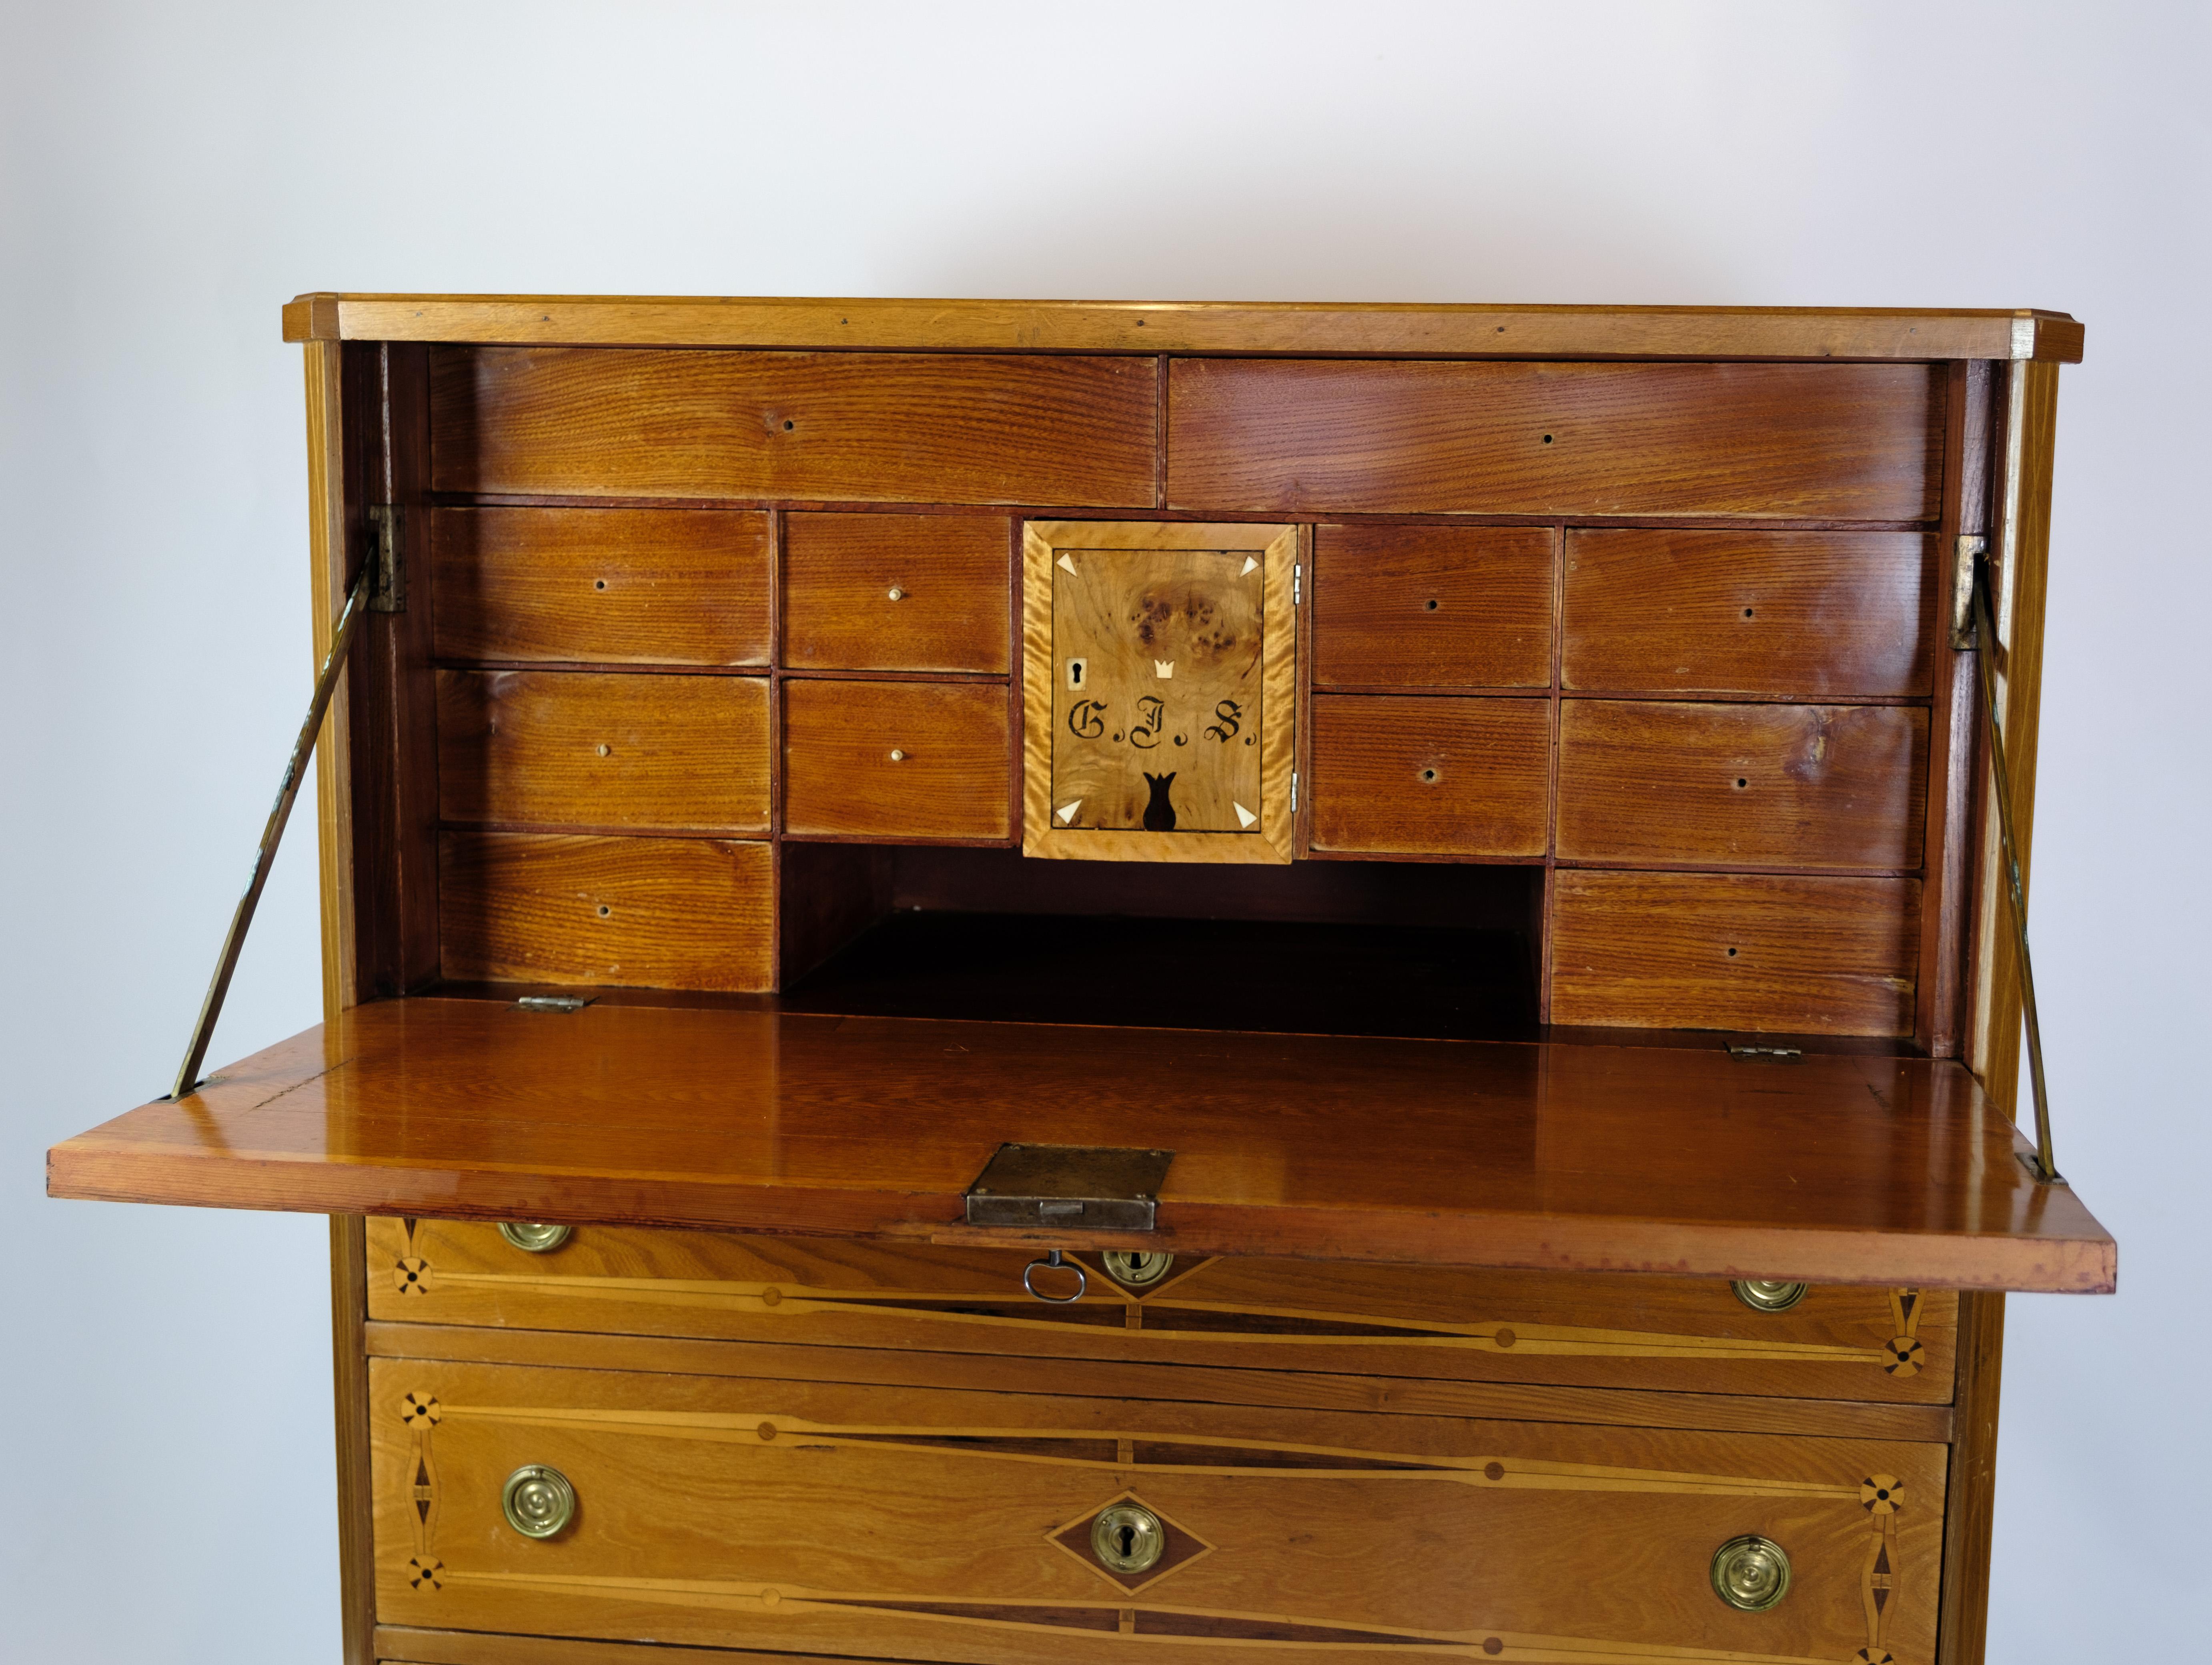 Secretary in Mahogany With Inlaid wood and Brass Handles from the 1790s For Sale 4